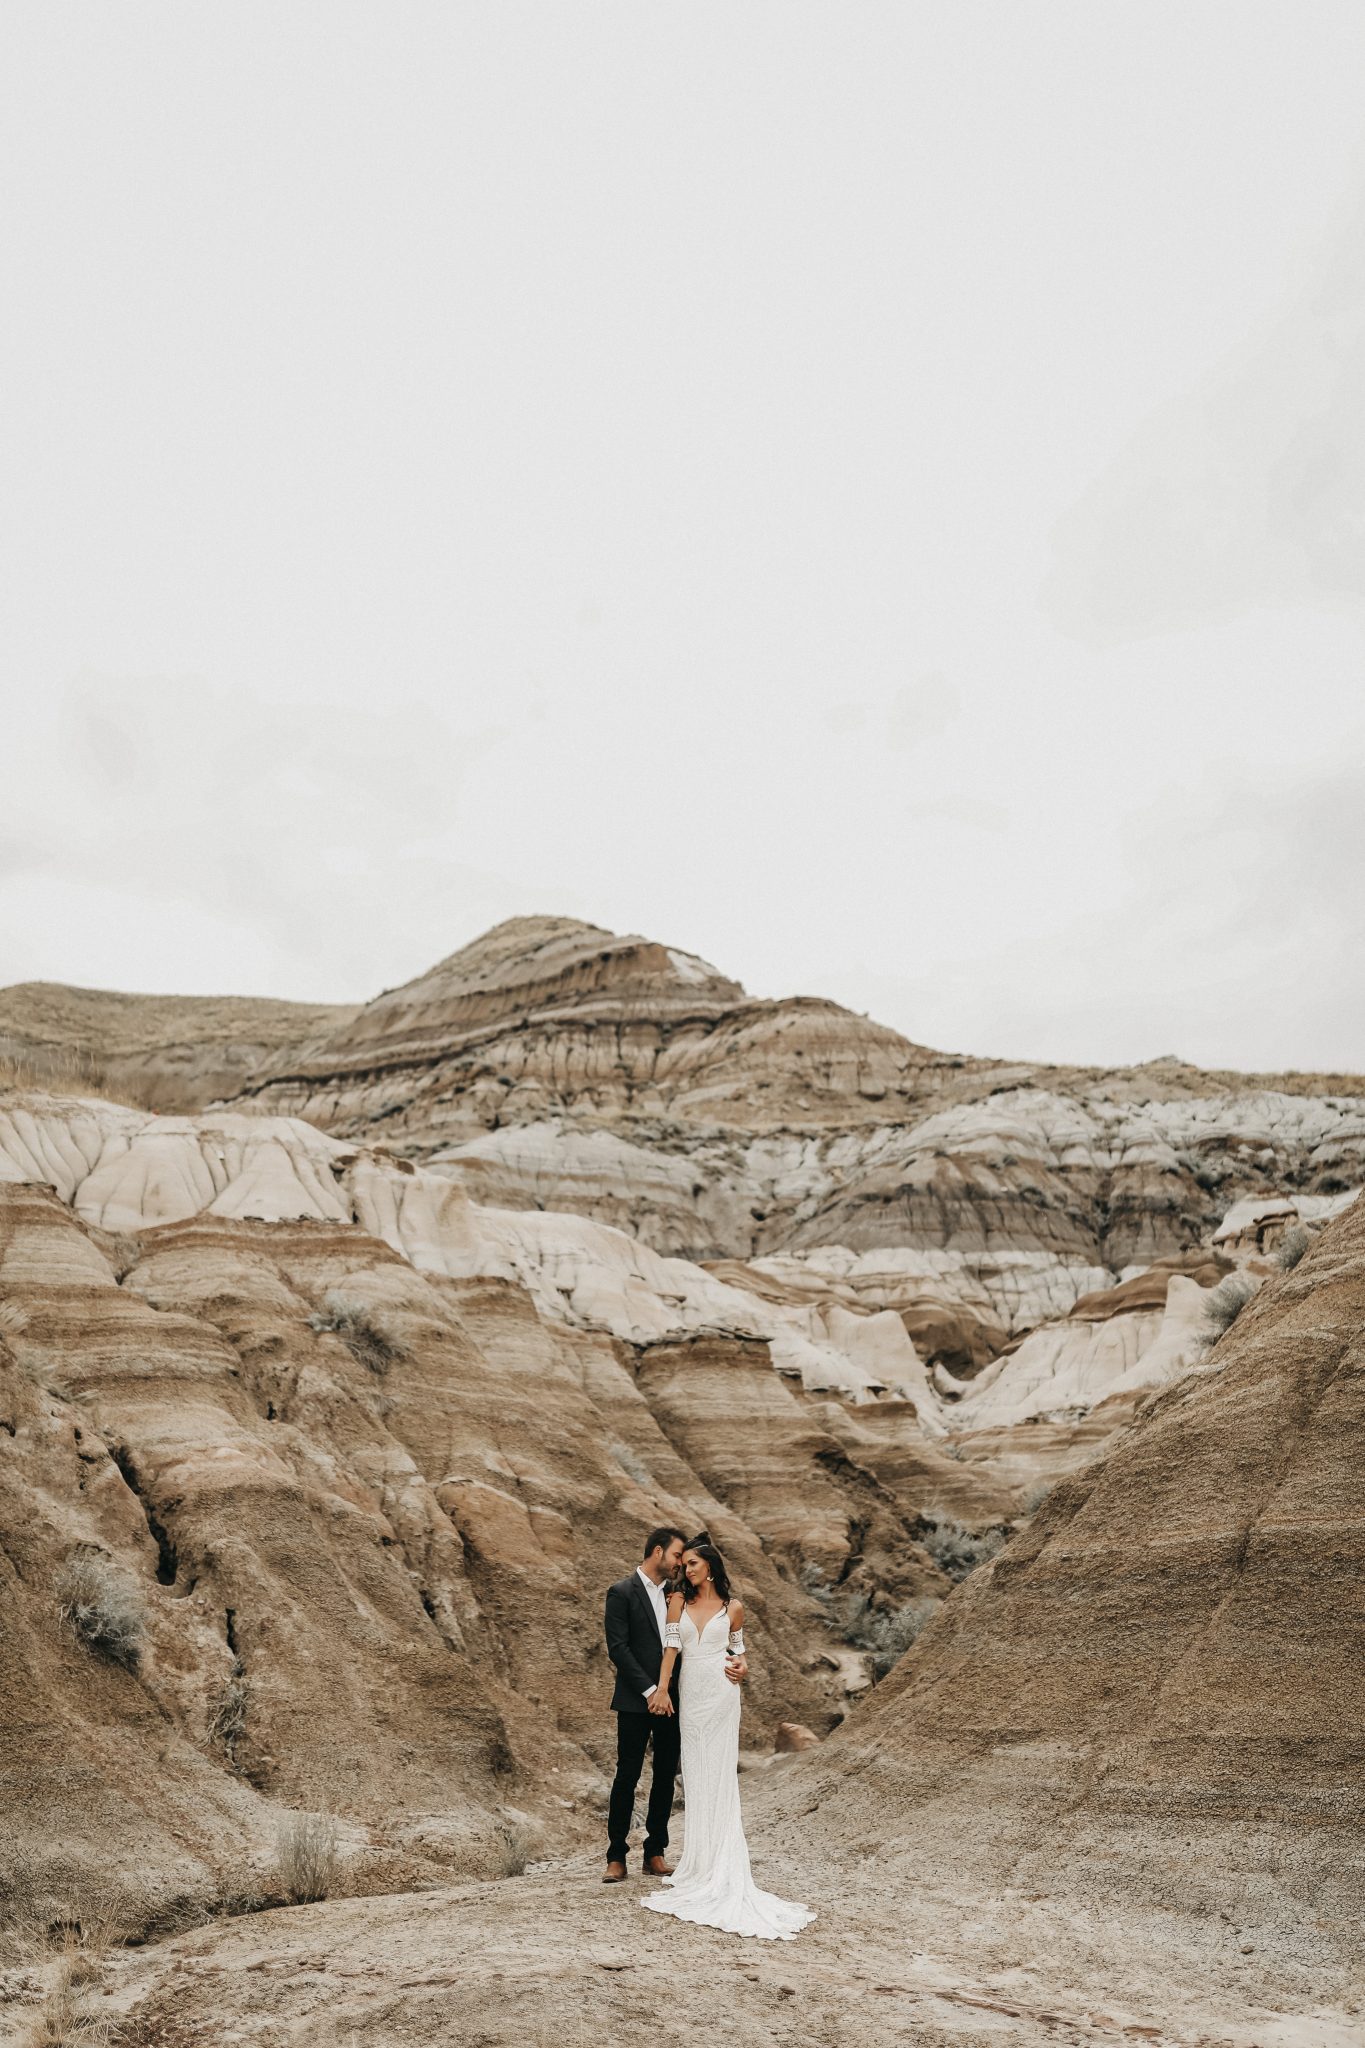 Bride and groom pose in front of the sand hills of Drumheller Alberta for Moroccan elopement inspiration